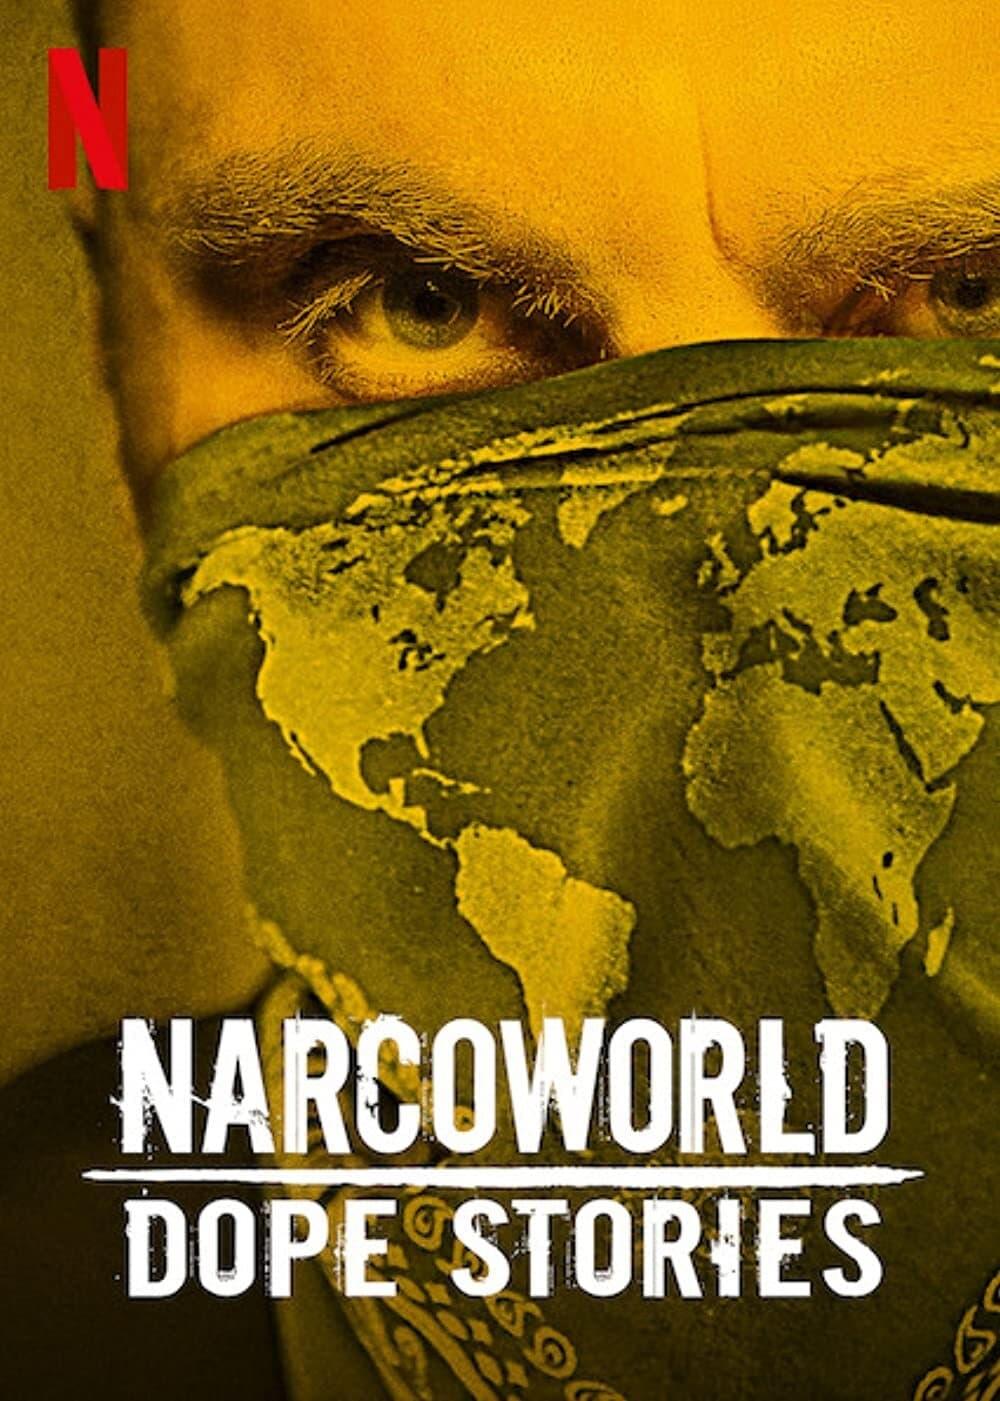 Narcoworld: Dope Stories poster